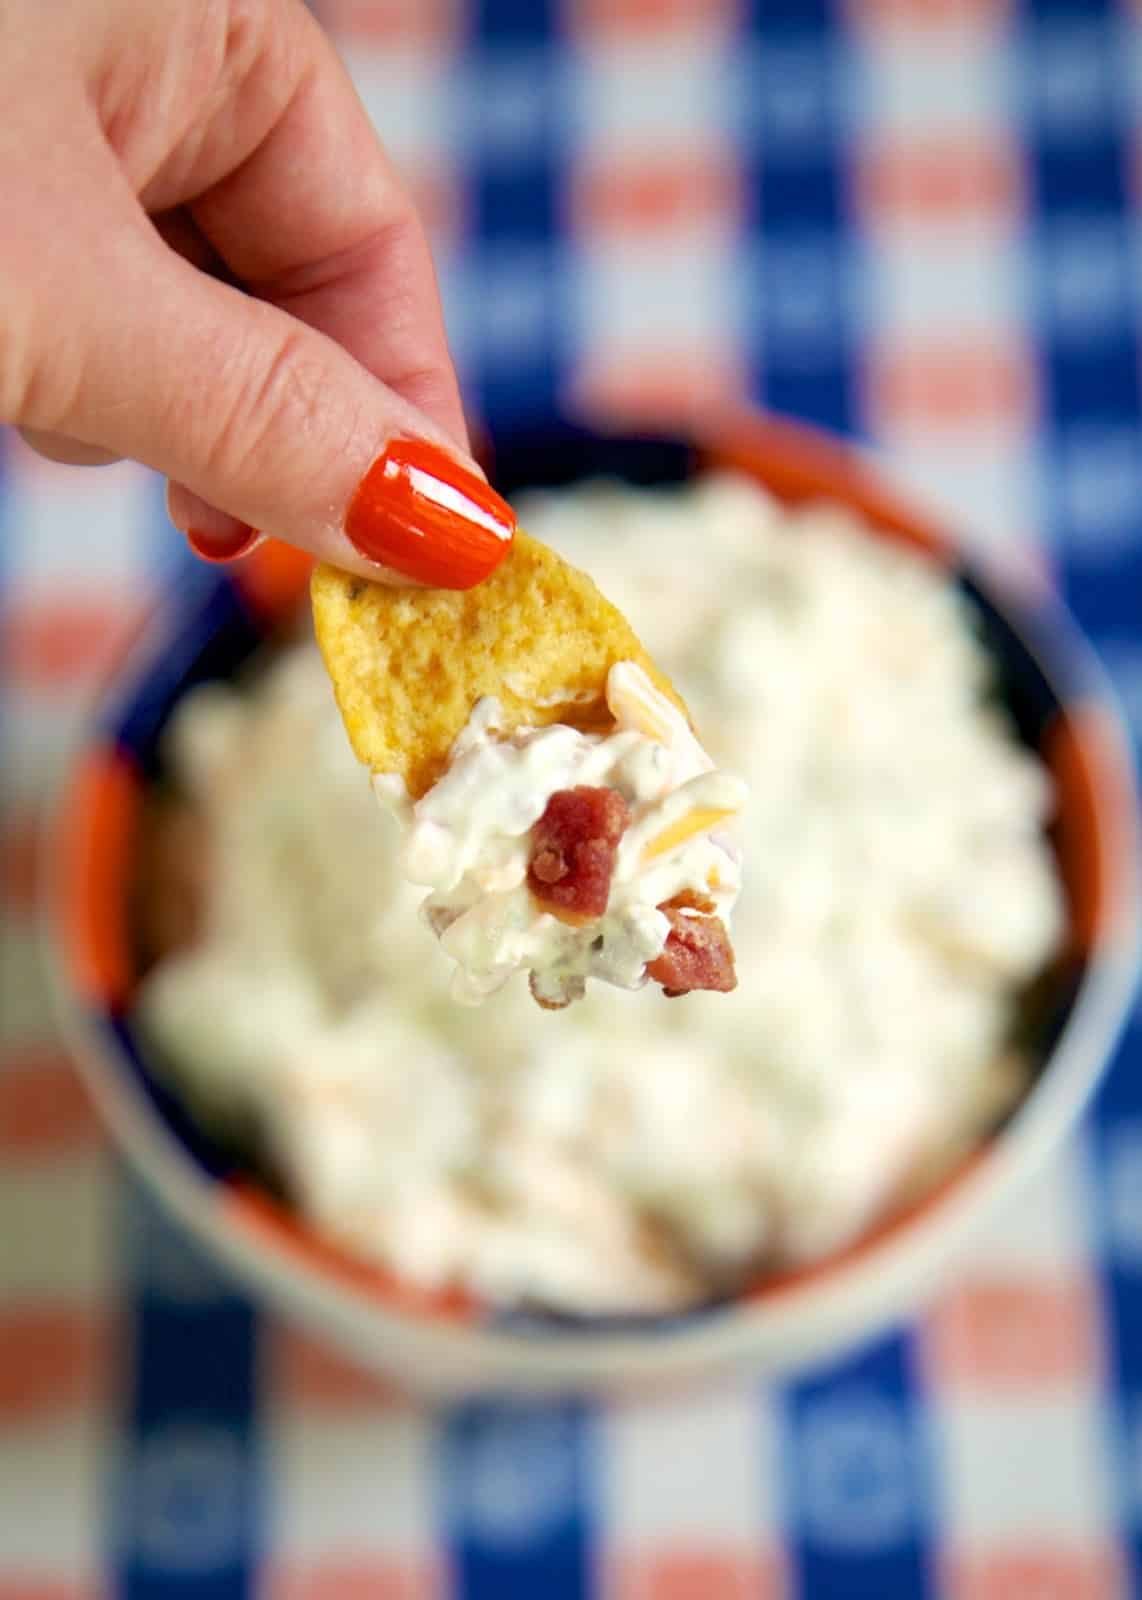 Cheddar Bacon Dip - "Crack" Dip - I always double the recipe and there is never any leftovers! People go crazy for this dip!!